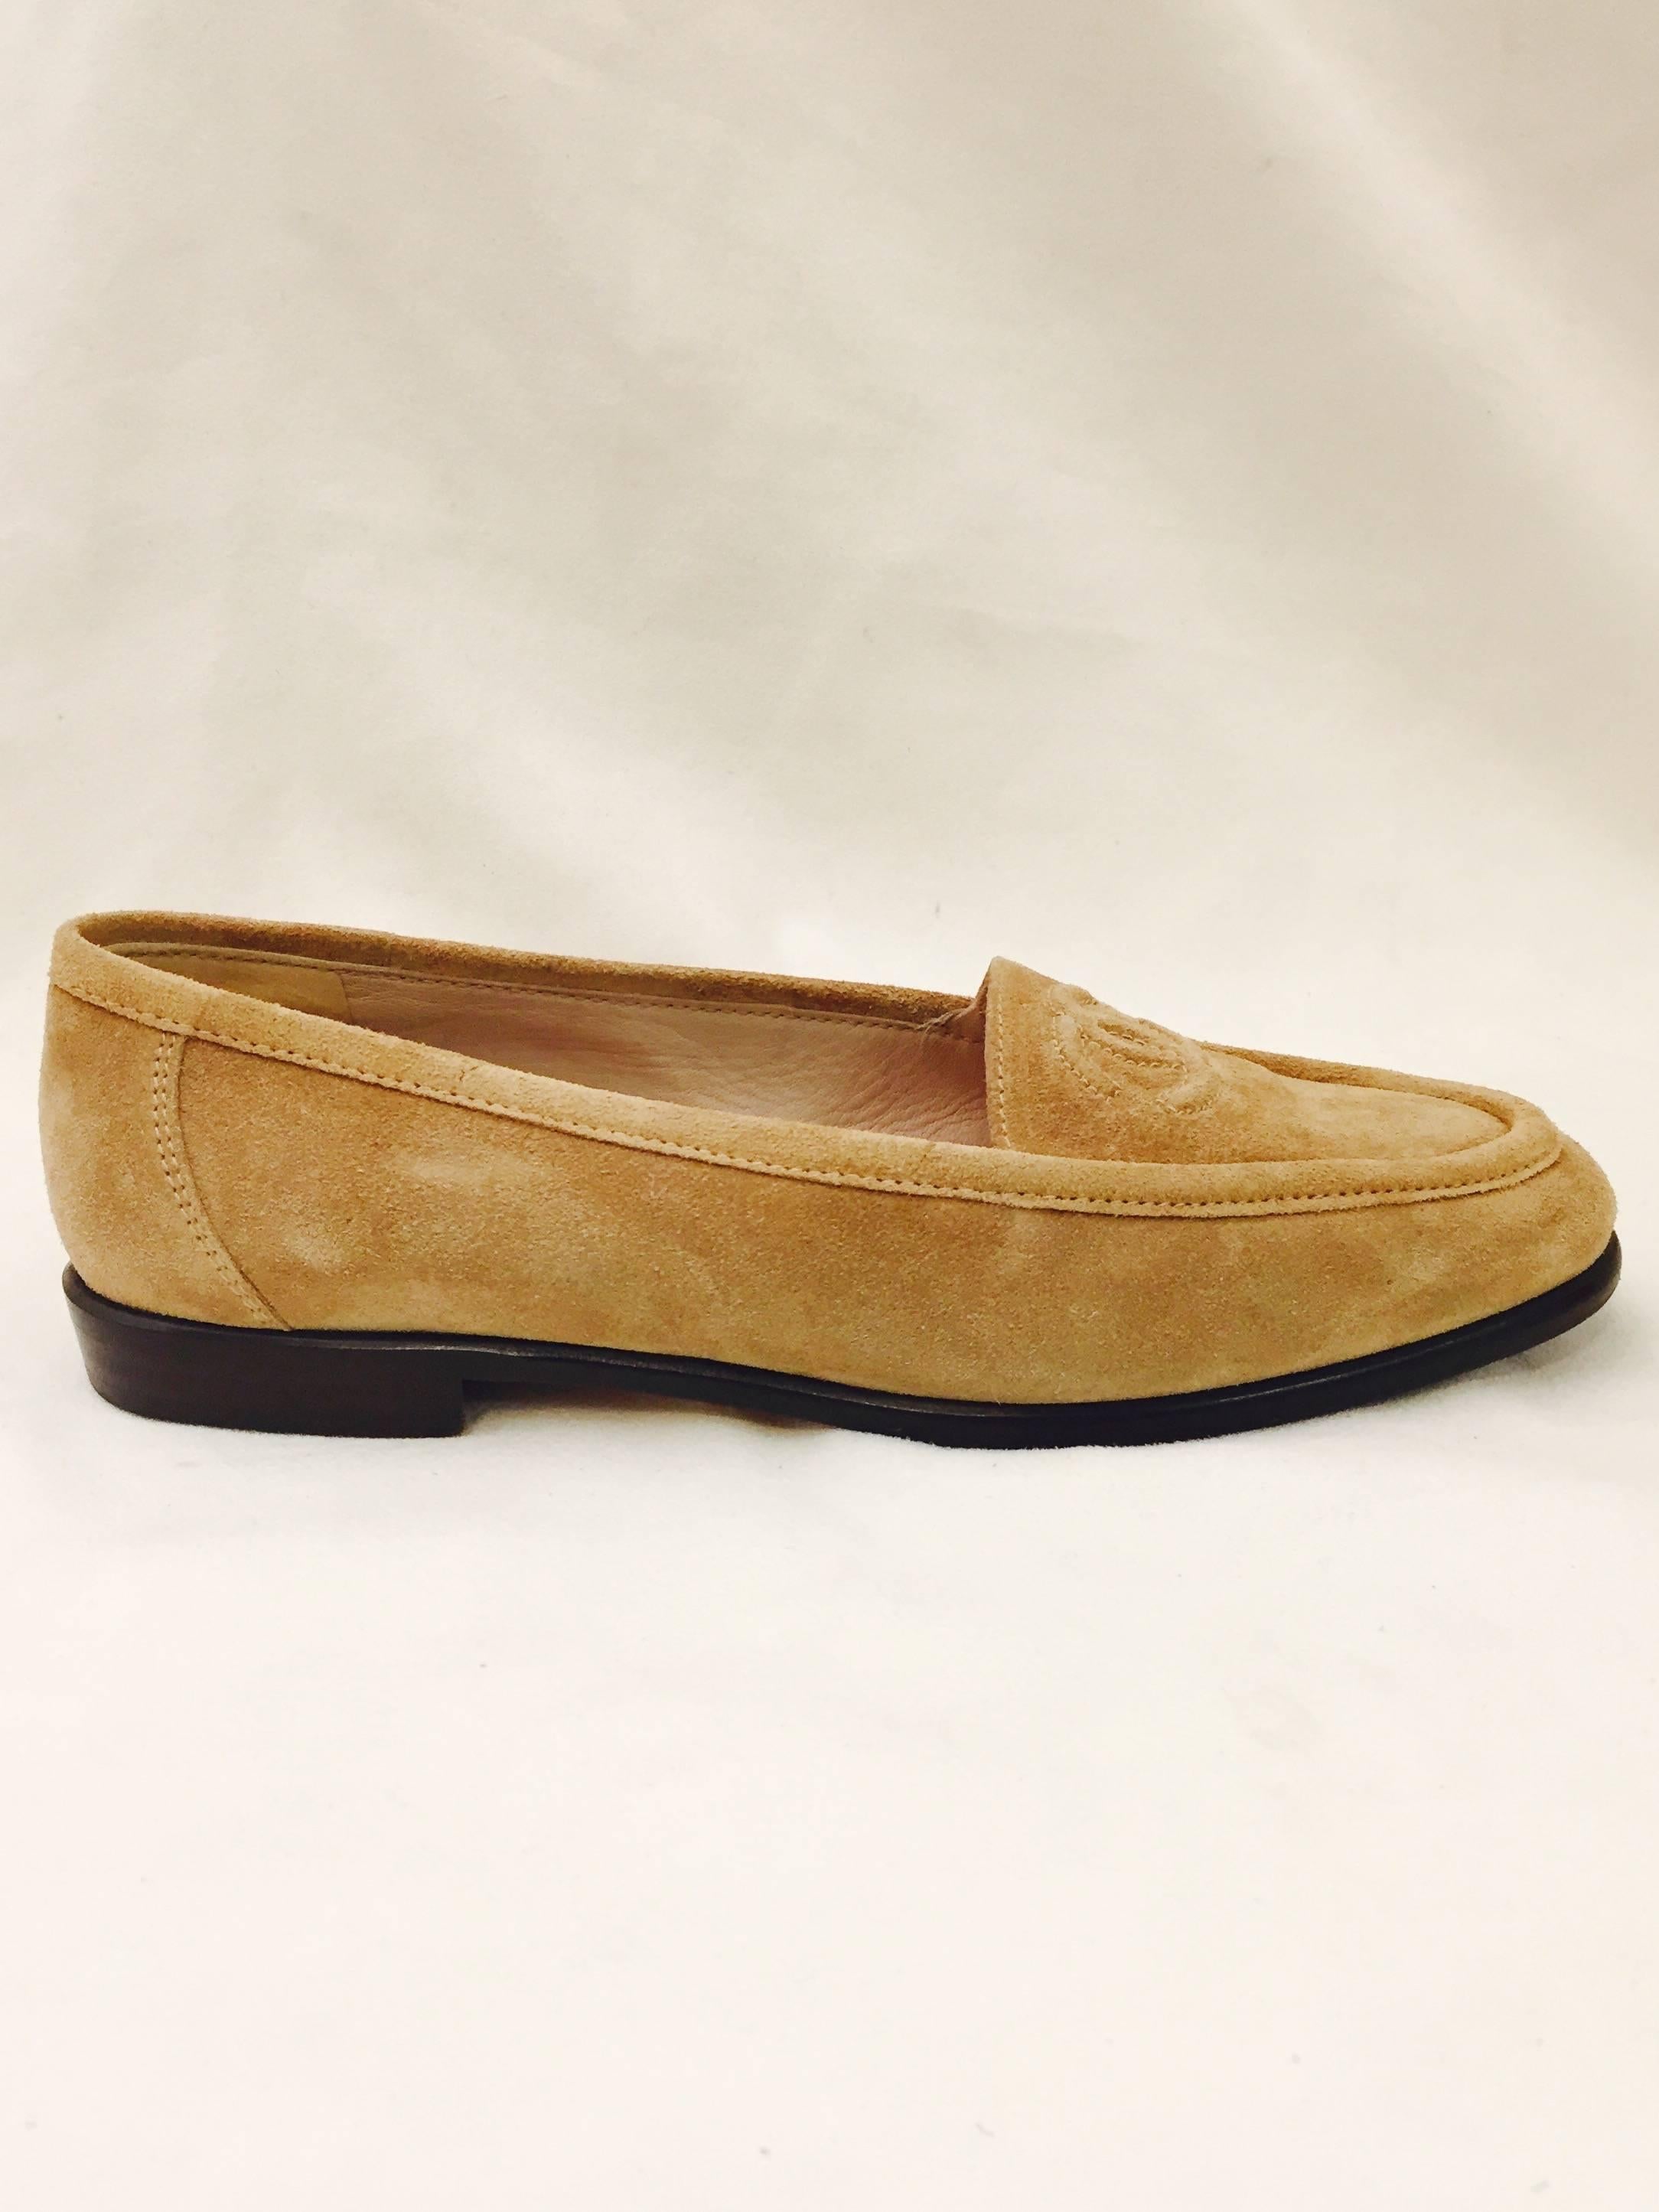 Distinctive and casual Chanel beige suede loafers with embossed CC logo on vamp are a must for all lovers of 